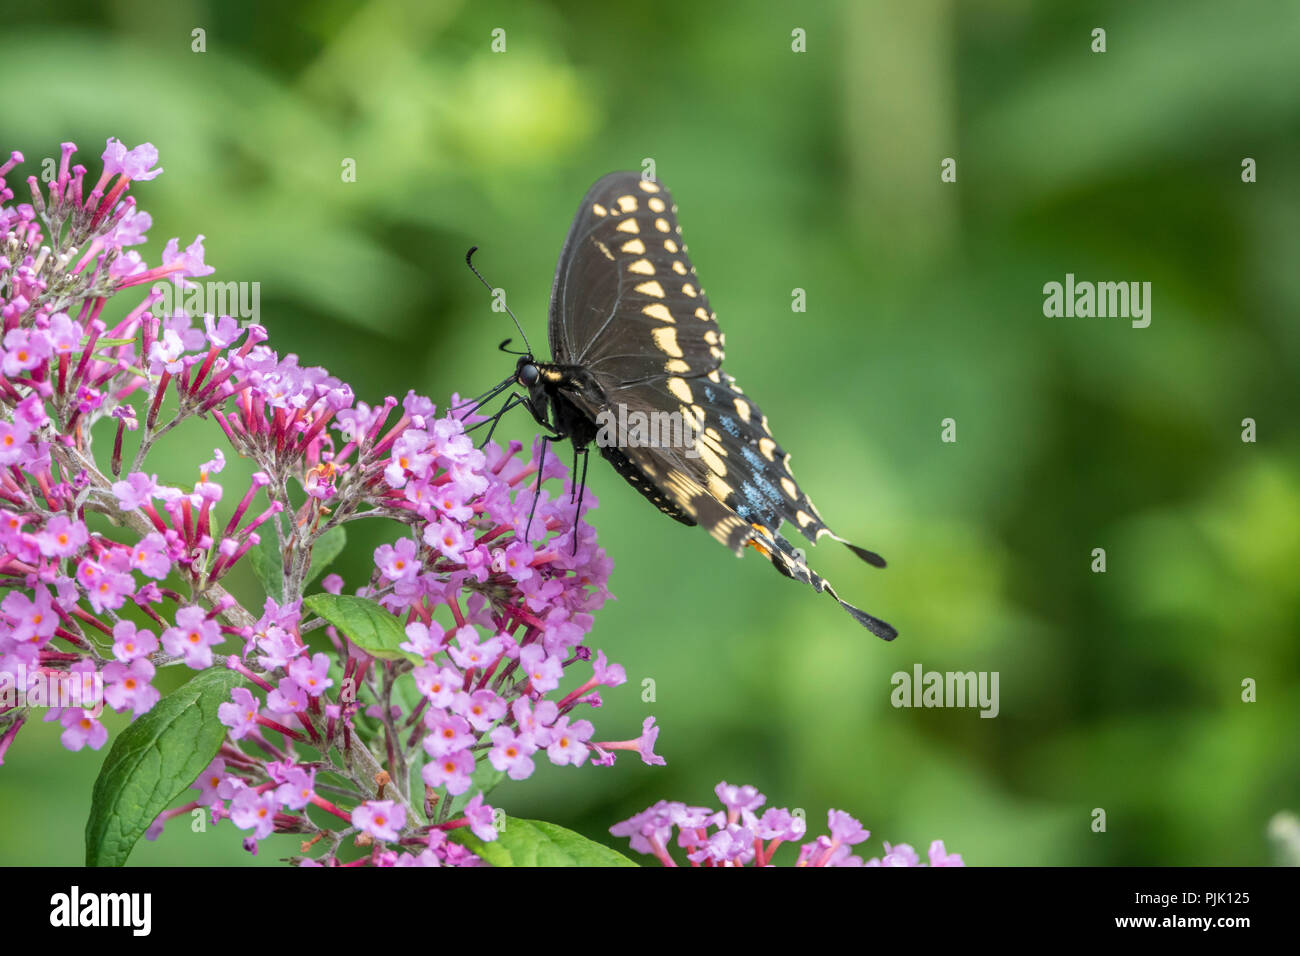 Papilio polyxenes, the eastern black swallowtail, American swallowtail or parsnip swallowtail, is a butterfly found throughout much of North America. Stock Photo